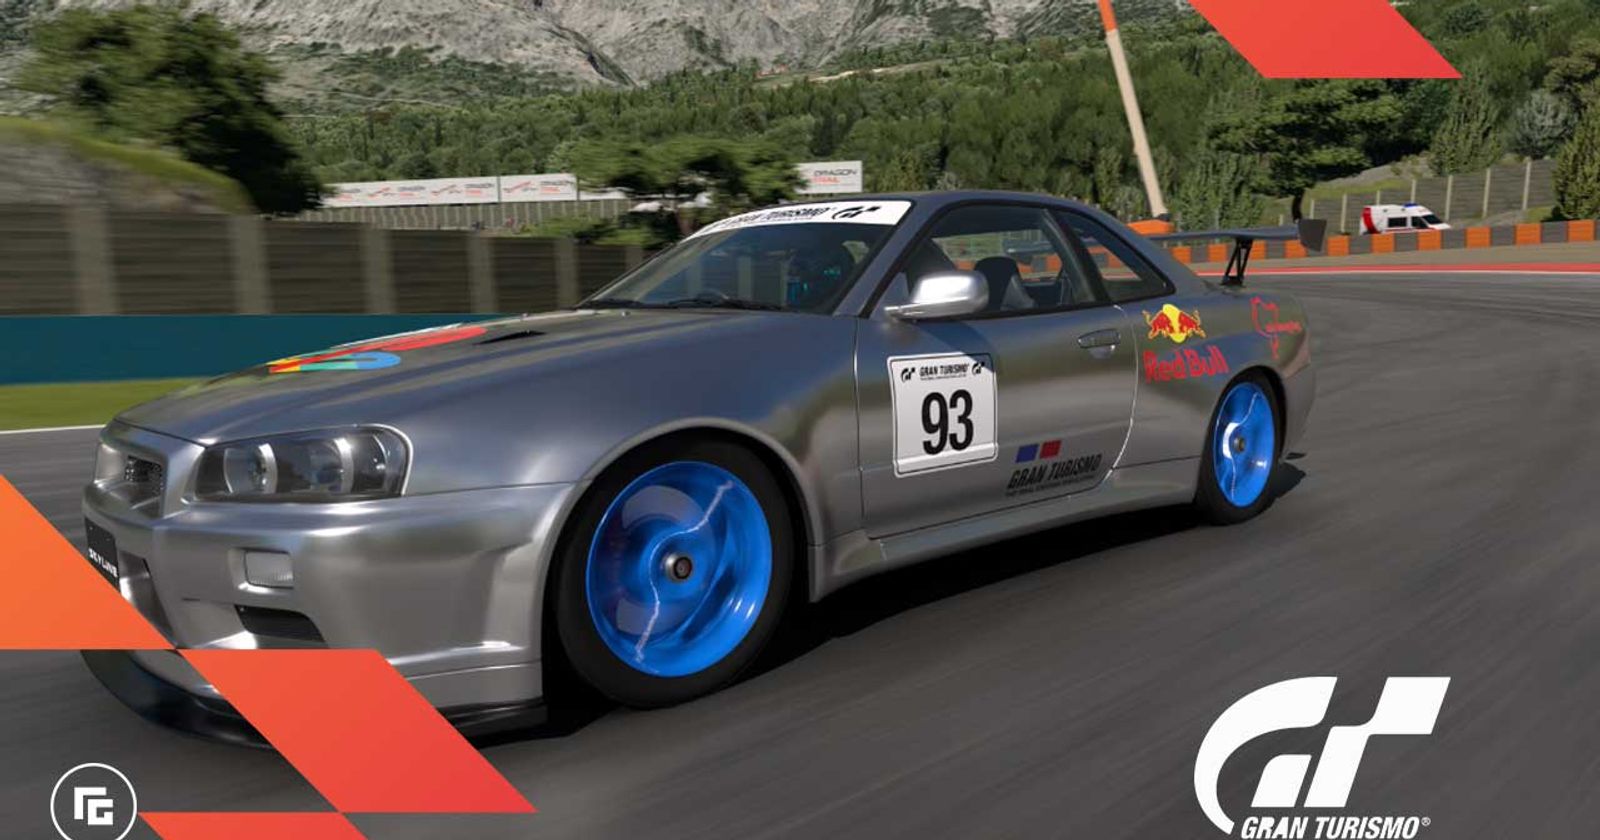 All The Free Prize Cars in Gran Turismo 7 – GTPlanet